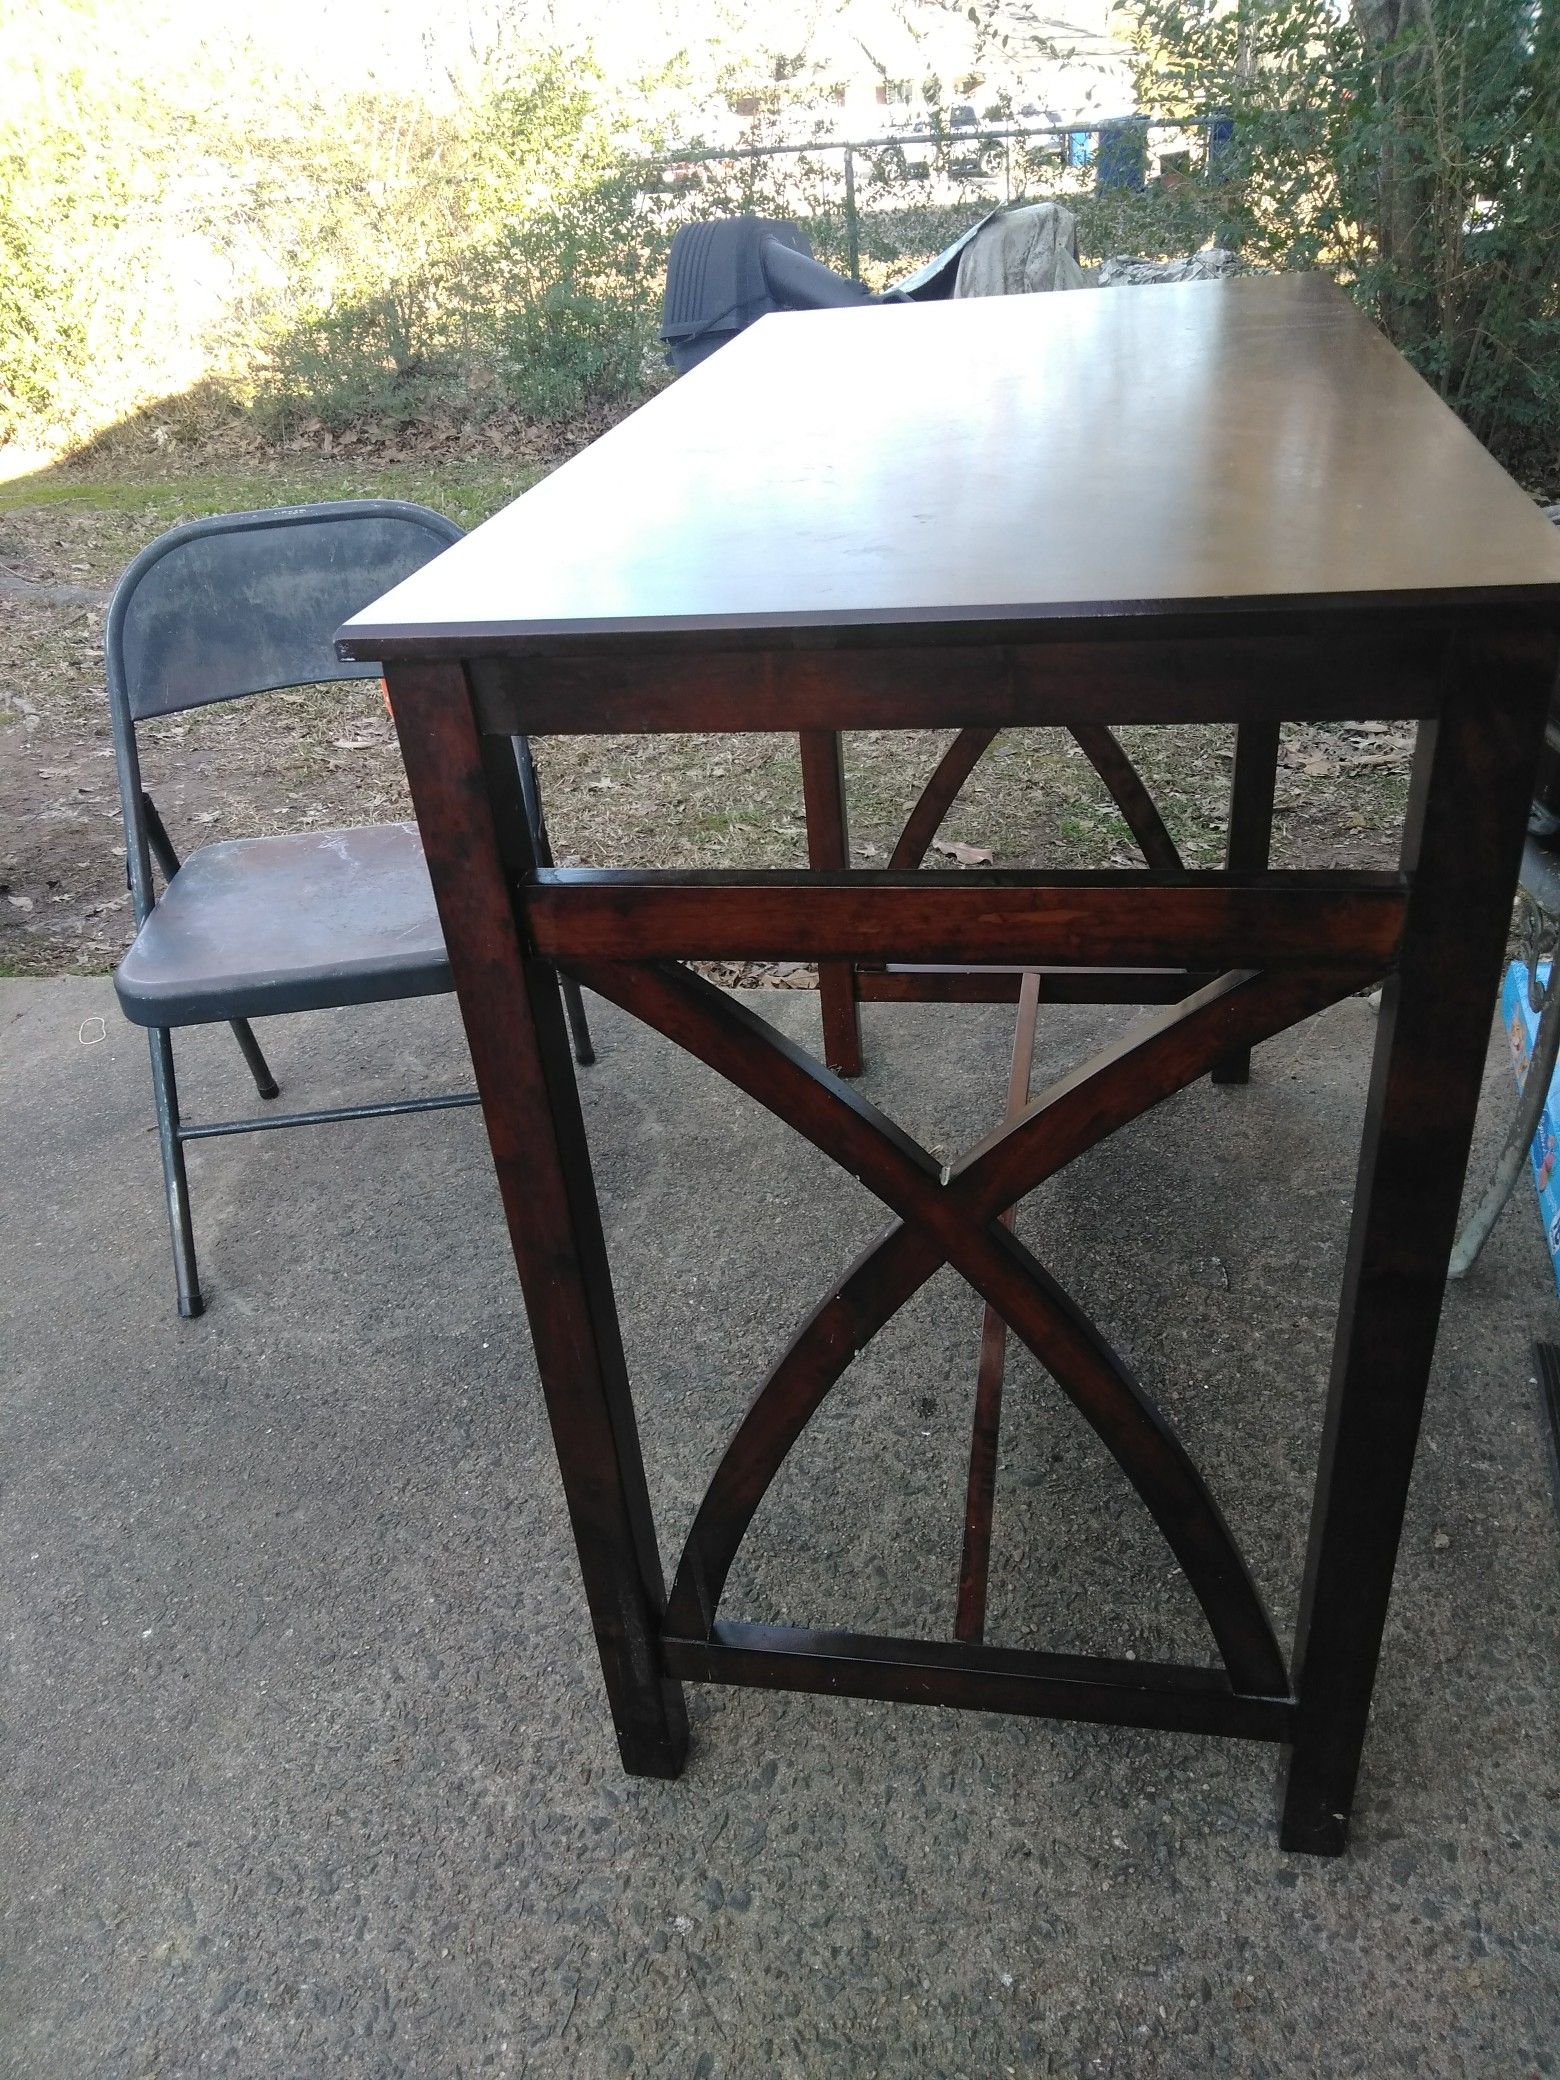 Kitchen table 42 x 22 top 36 inches tall Cabot Arkansas